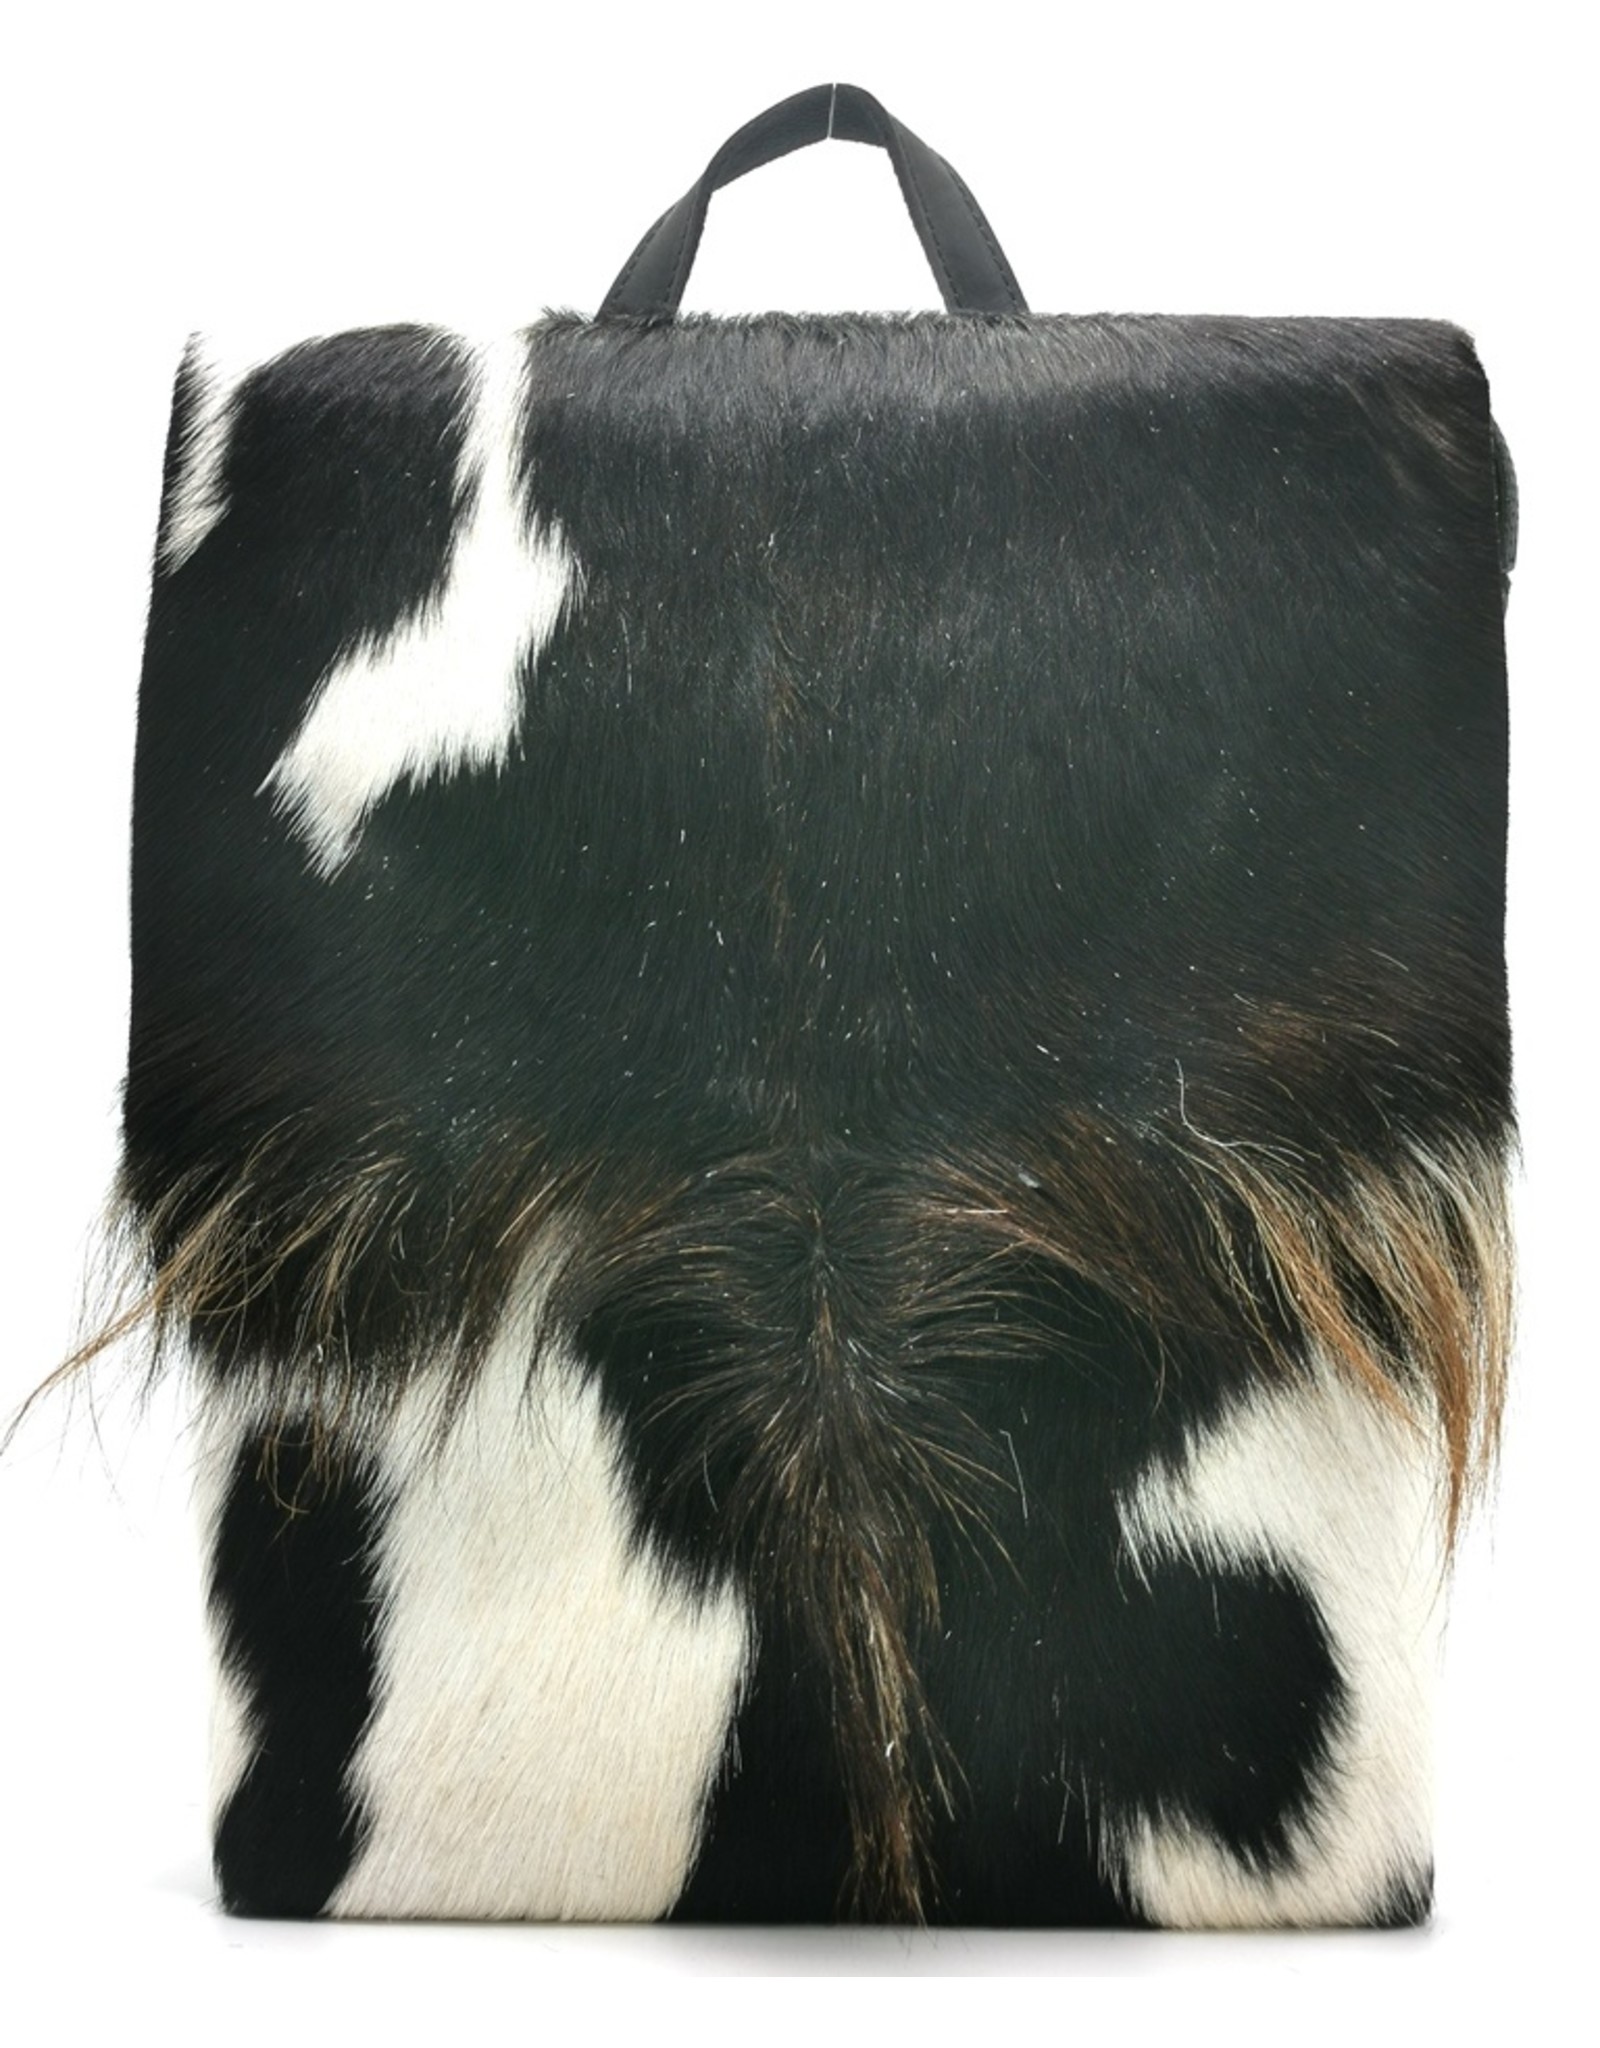 Hide & Stitches Leather backpacks  and leather shoppers - Hide & Stitches Leather Backpack with Fur Cover Black - 6